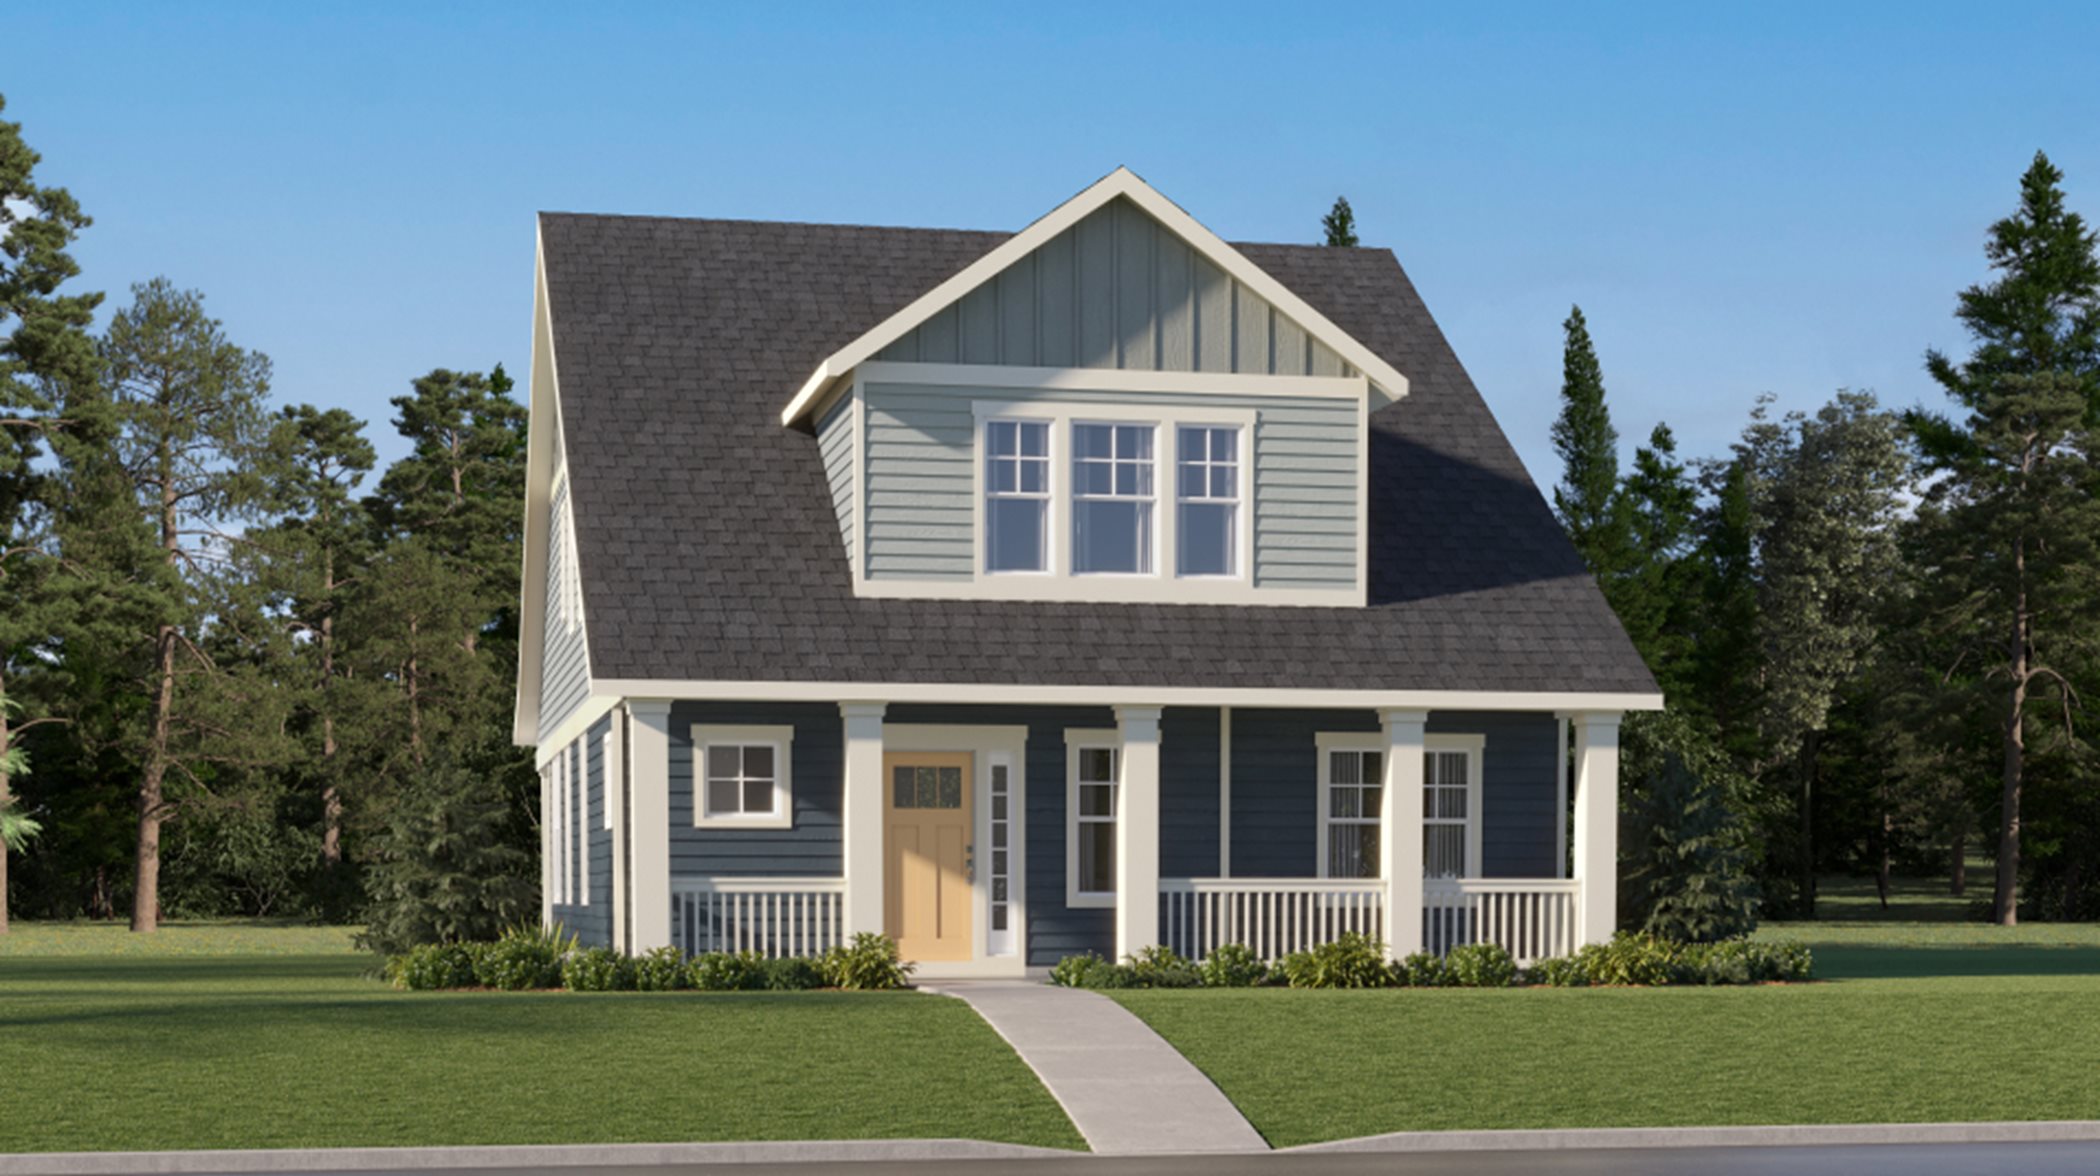 Exterior A home rendering